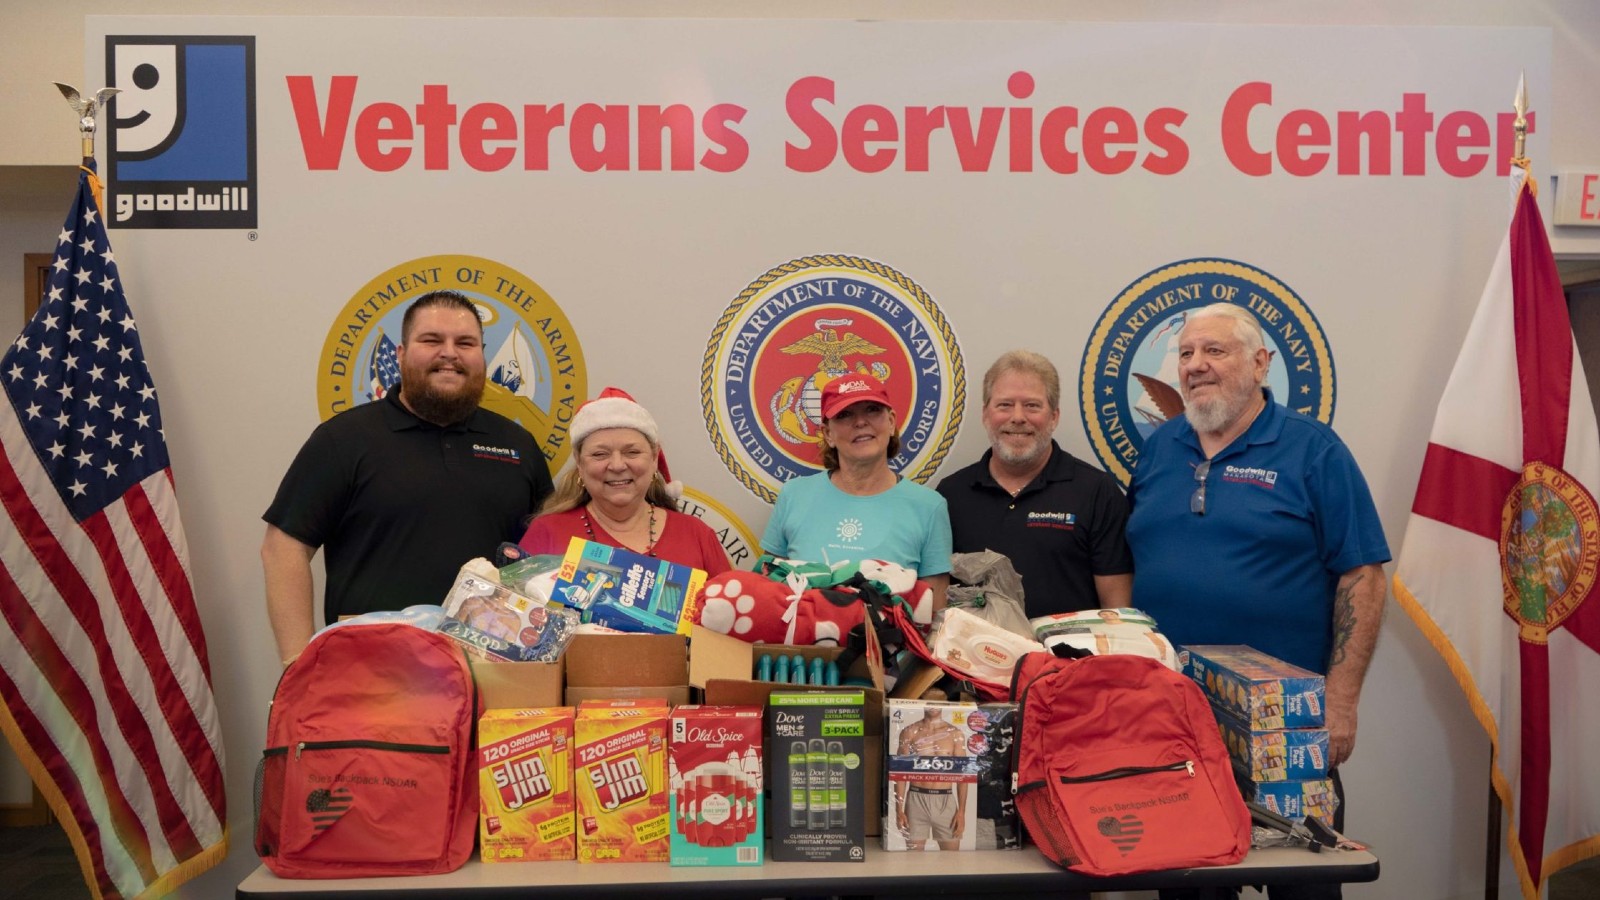 Local DAR Members Donated 50 Backpacks And Supplies To Homeless Veterans